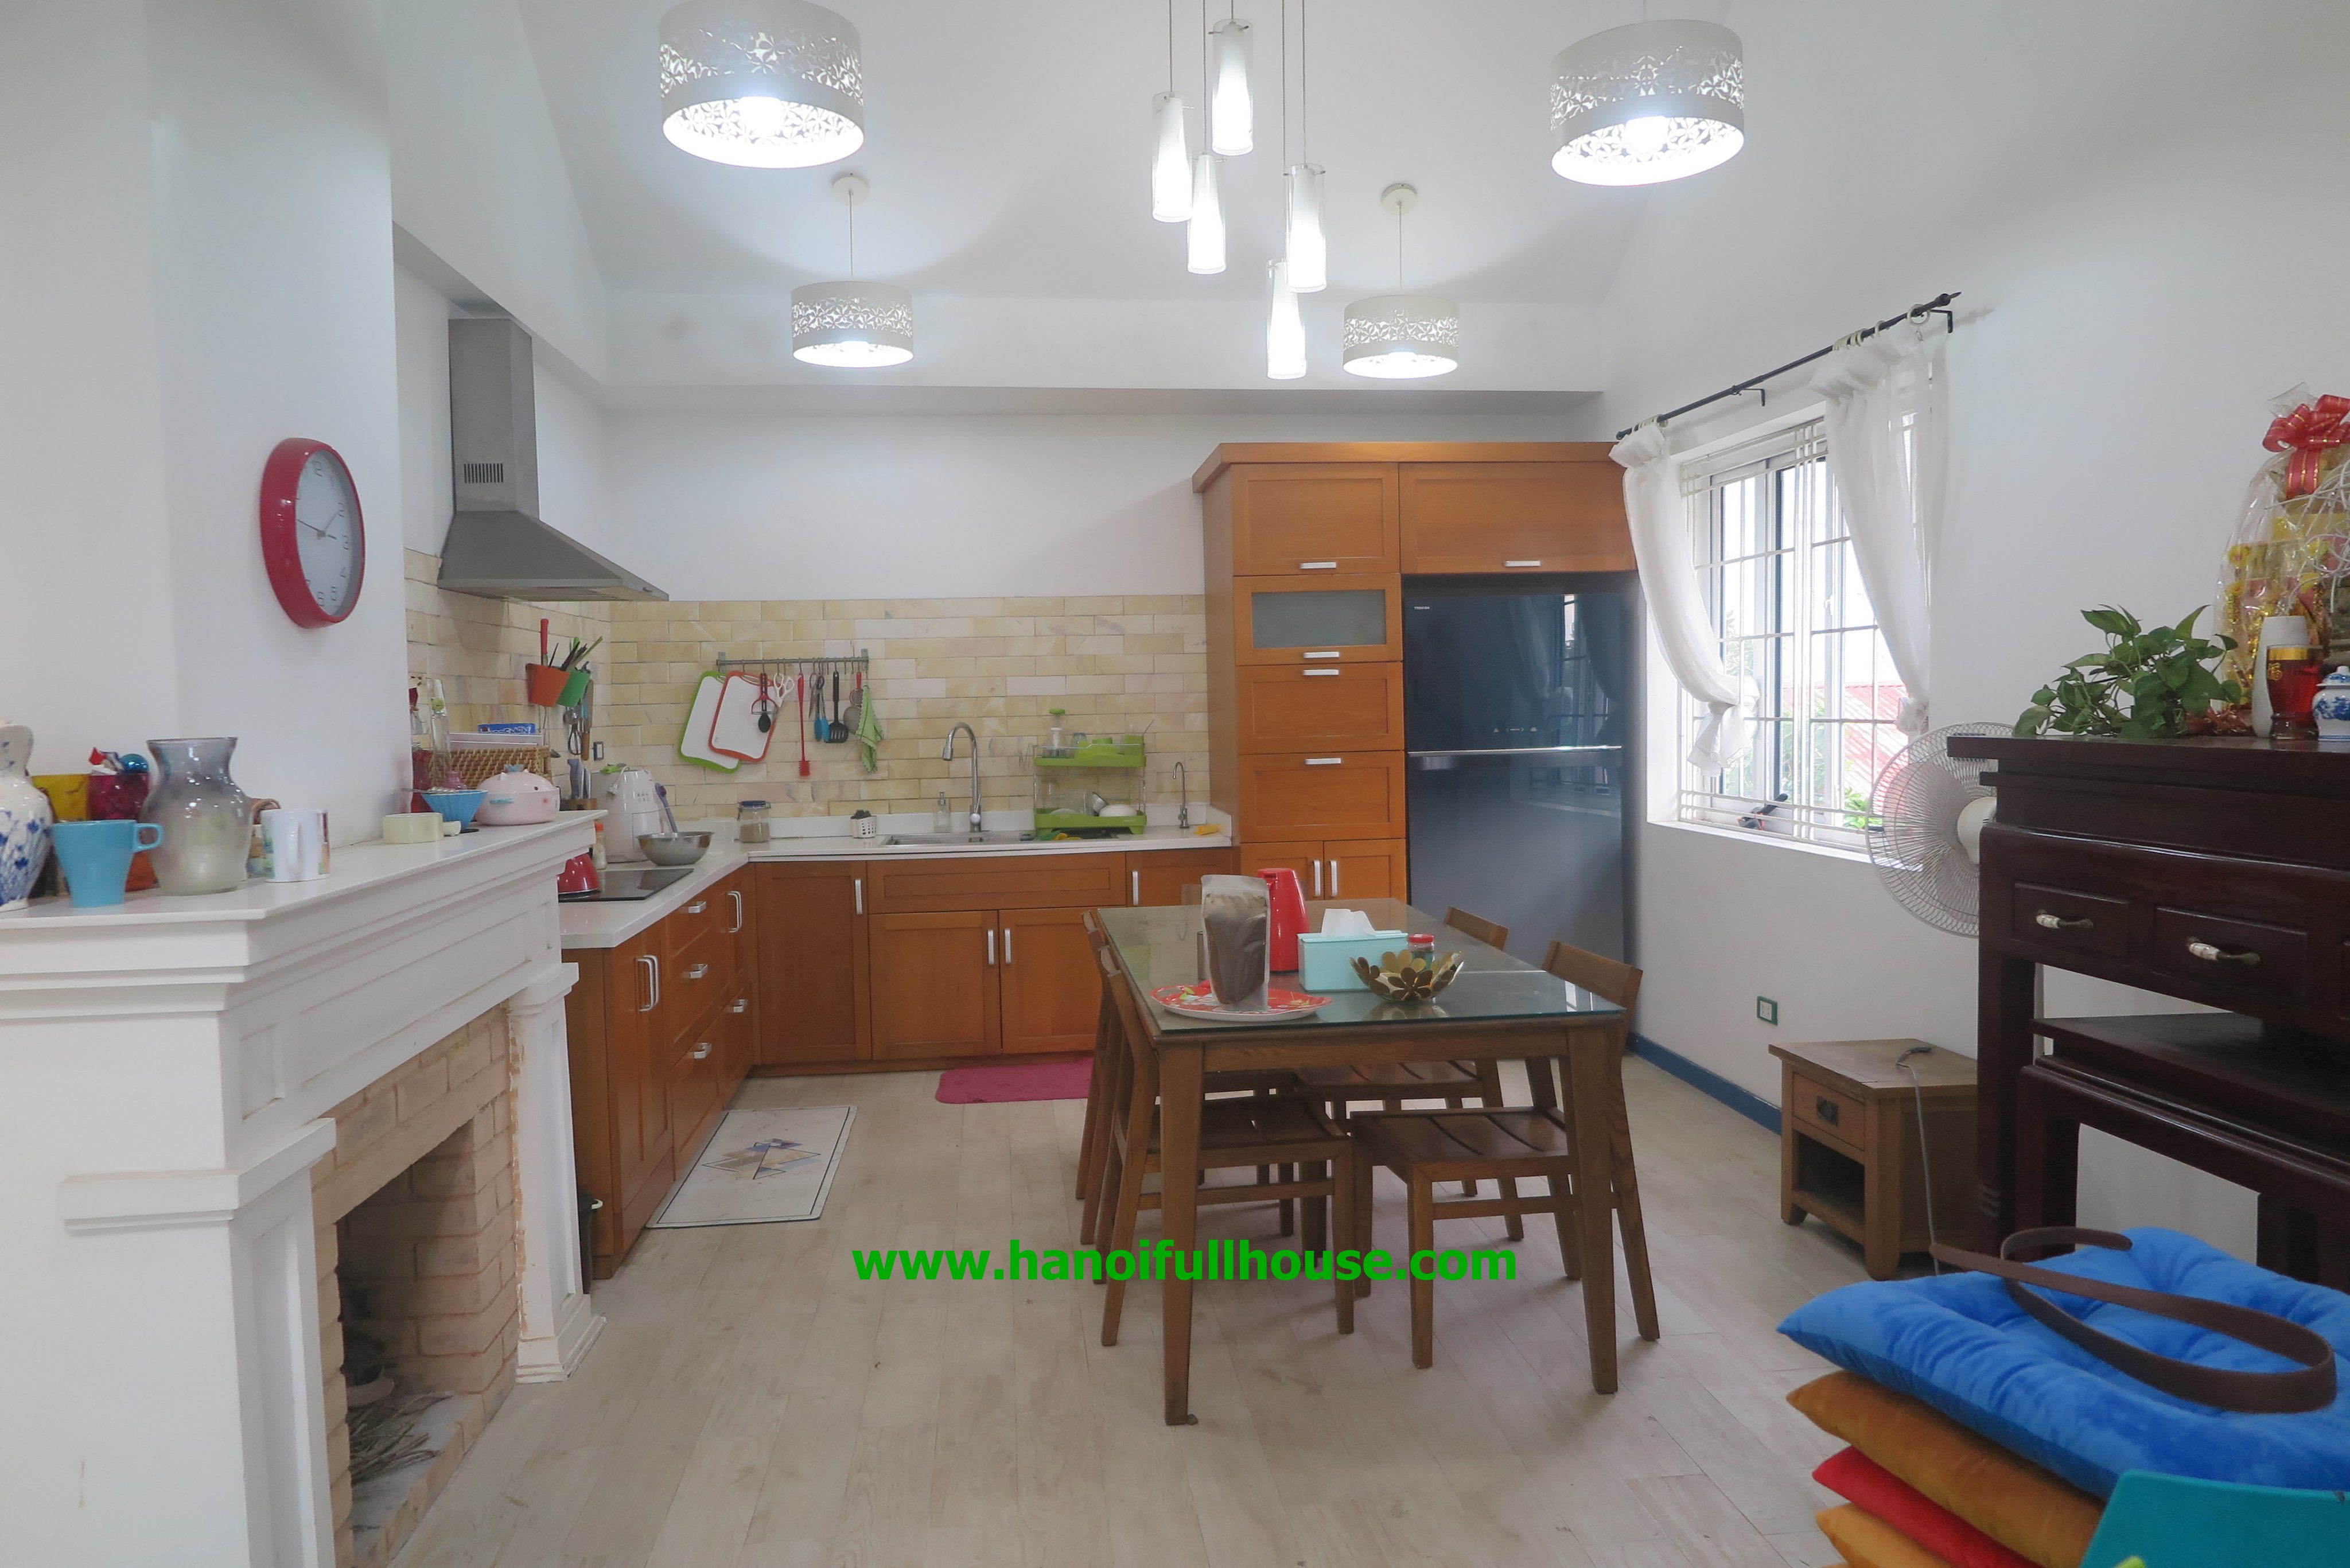 Lovely, airy 2-storey house near French school, Long Bien district for lease